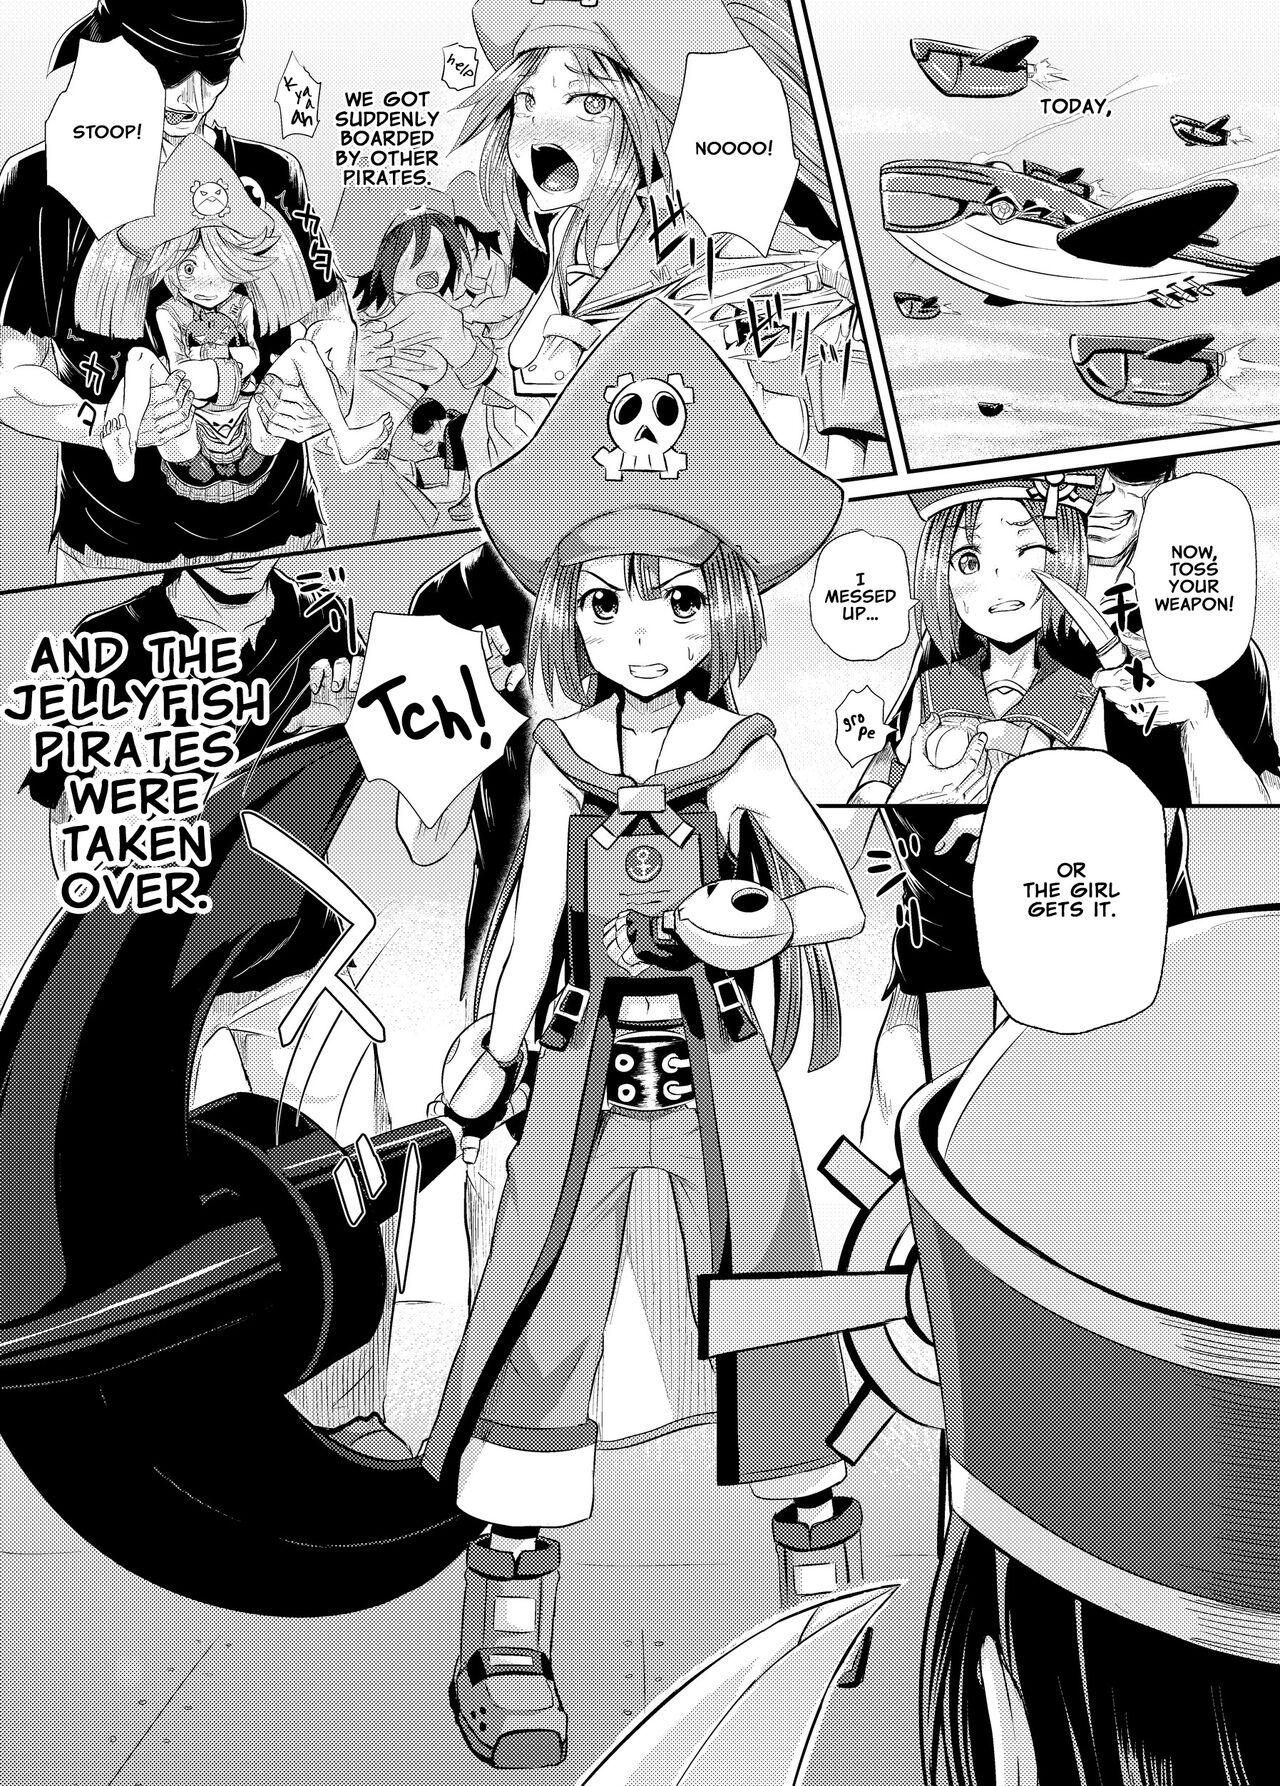 Gilf Jellyfish wa Nottotta!! | The Jellyfish Pirates Have Been Taken Over!! - Guilty gear Africa - Page 2